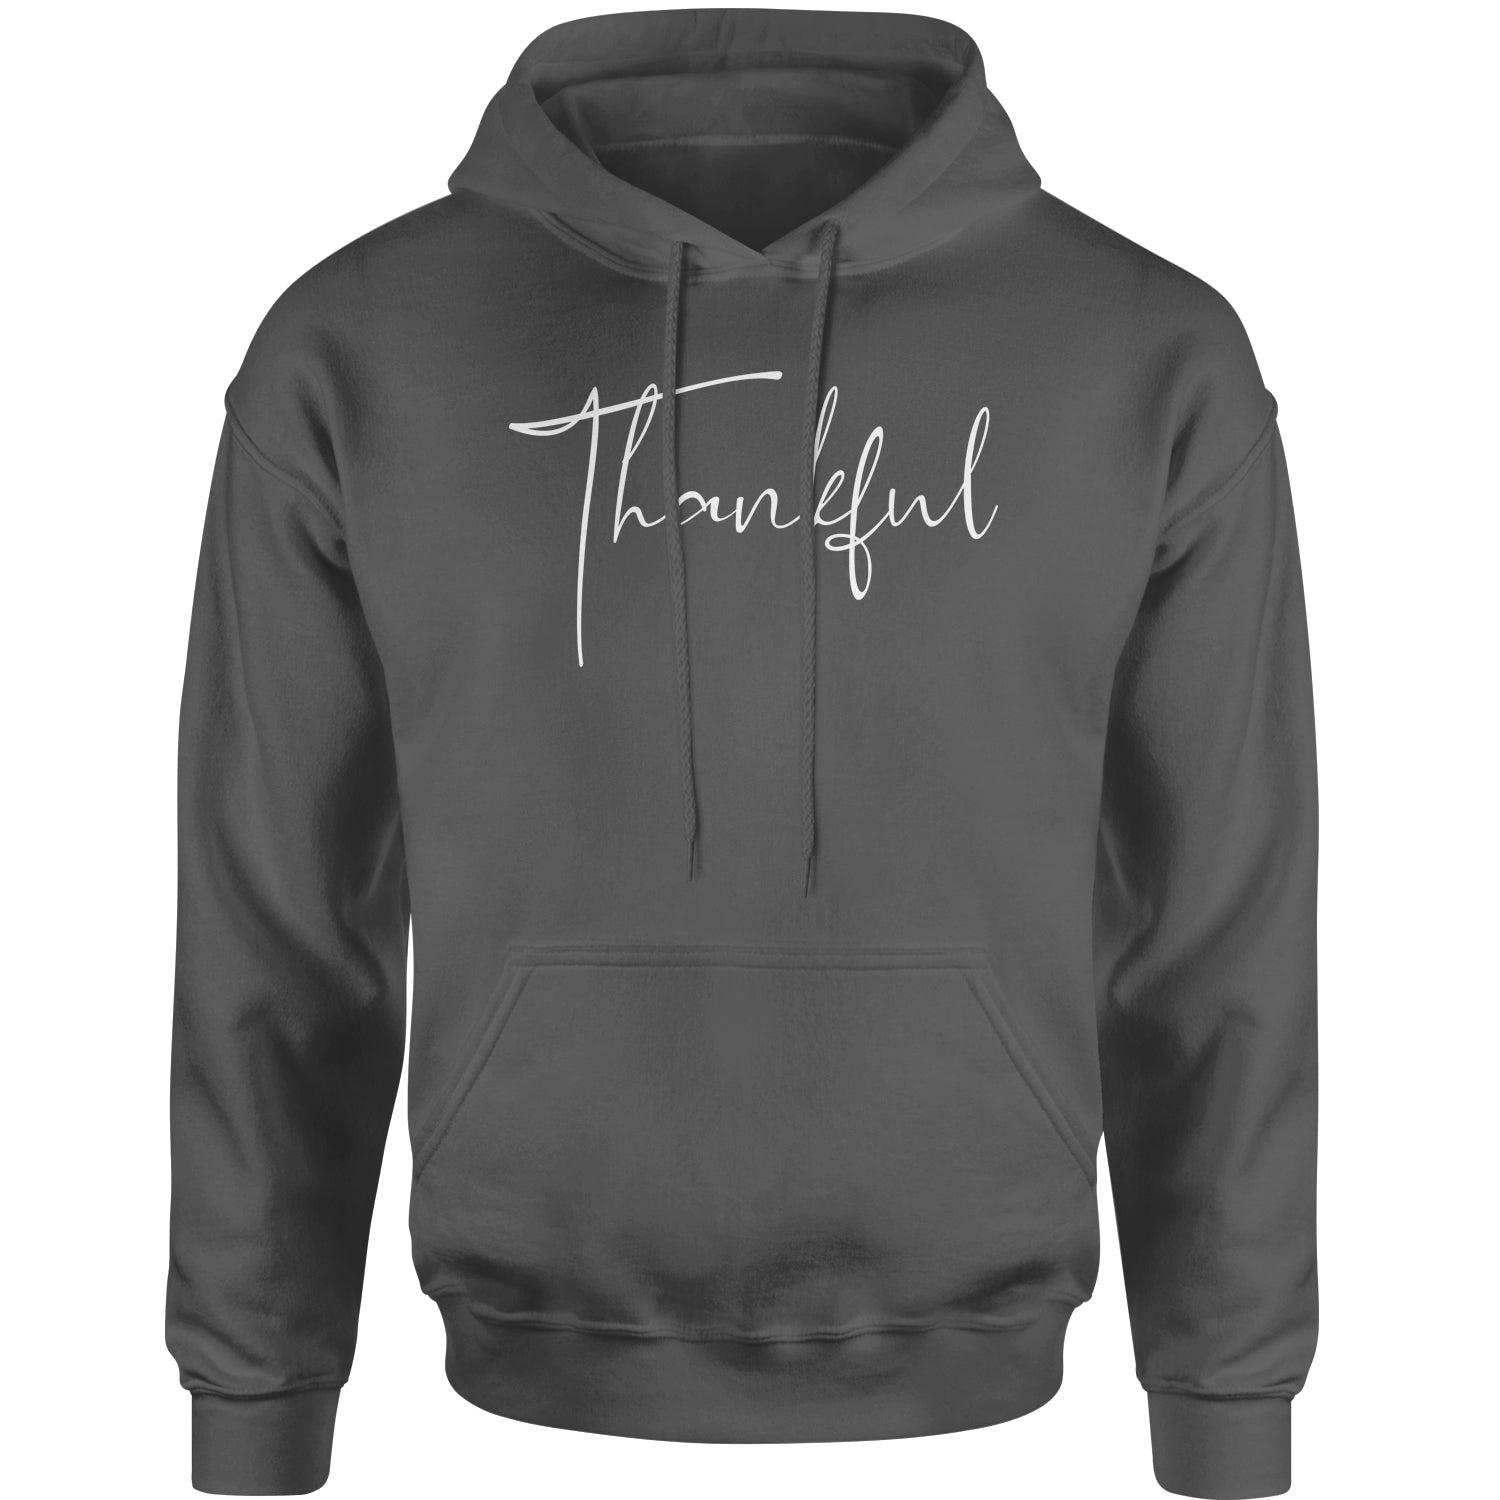 Thankful Adult Hoodie Sweatshirt thanksgiving by Expression Tees